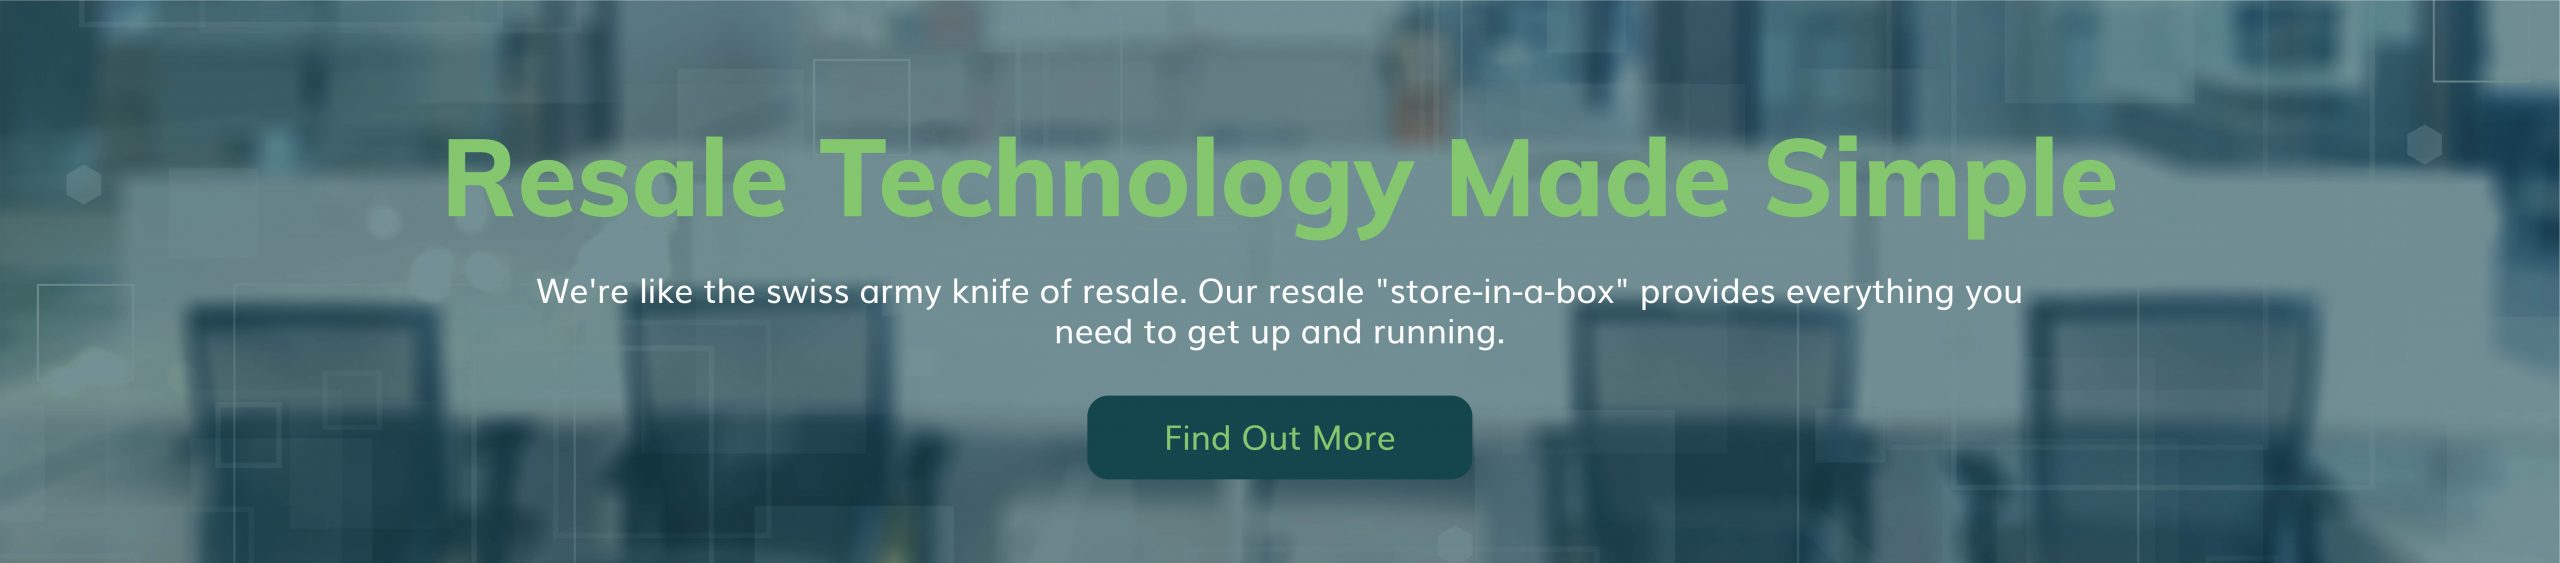 resale1 technology made simple banner